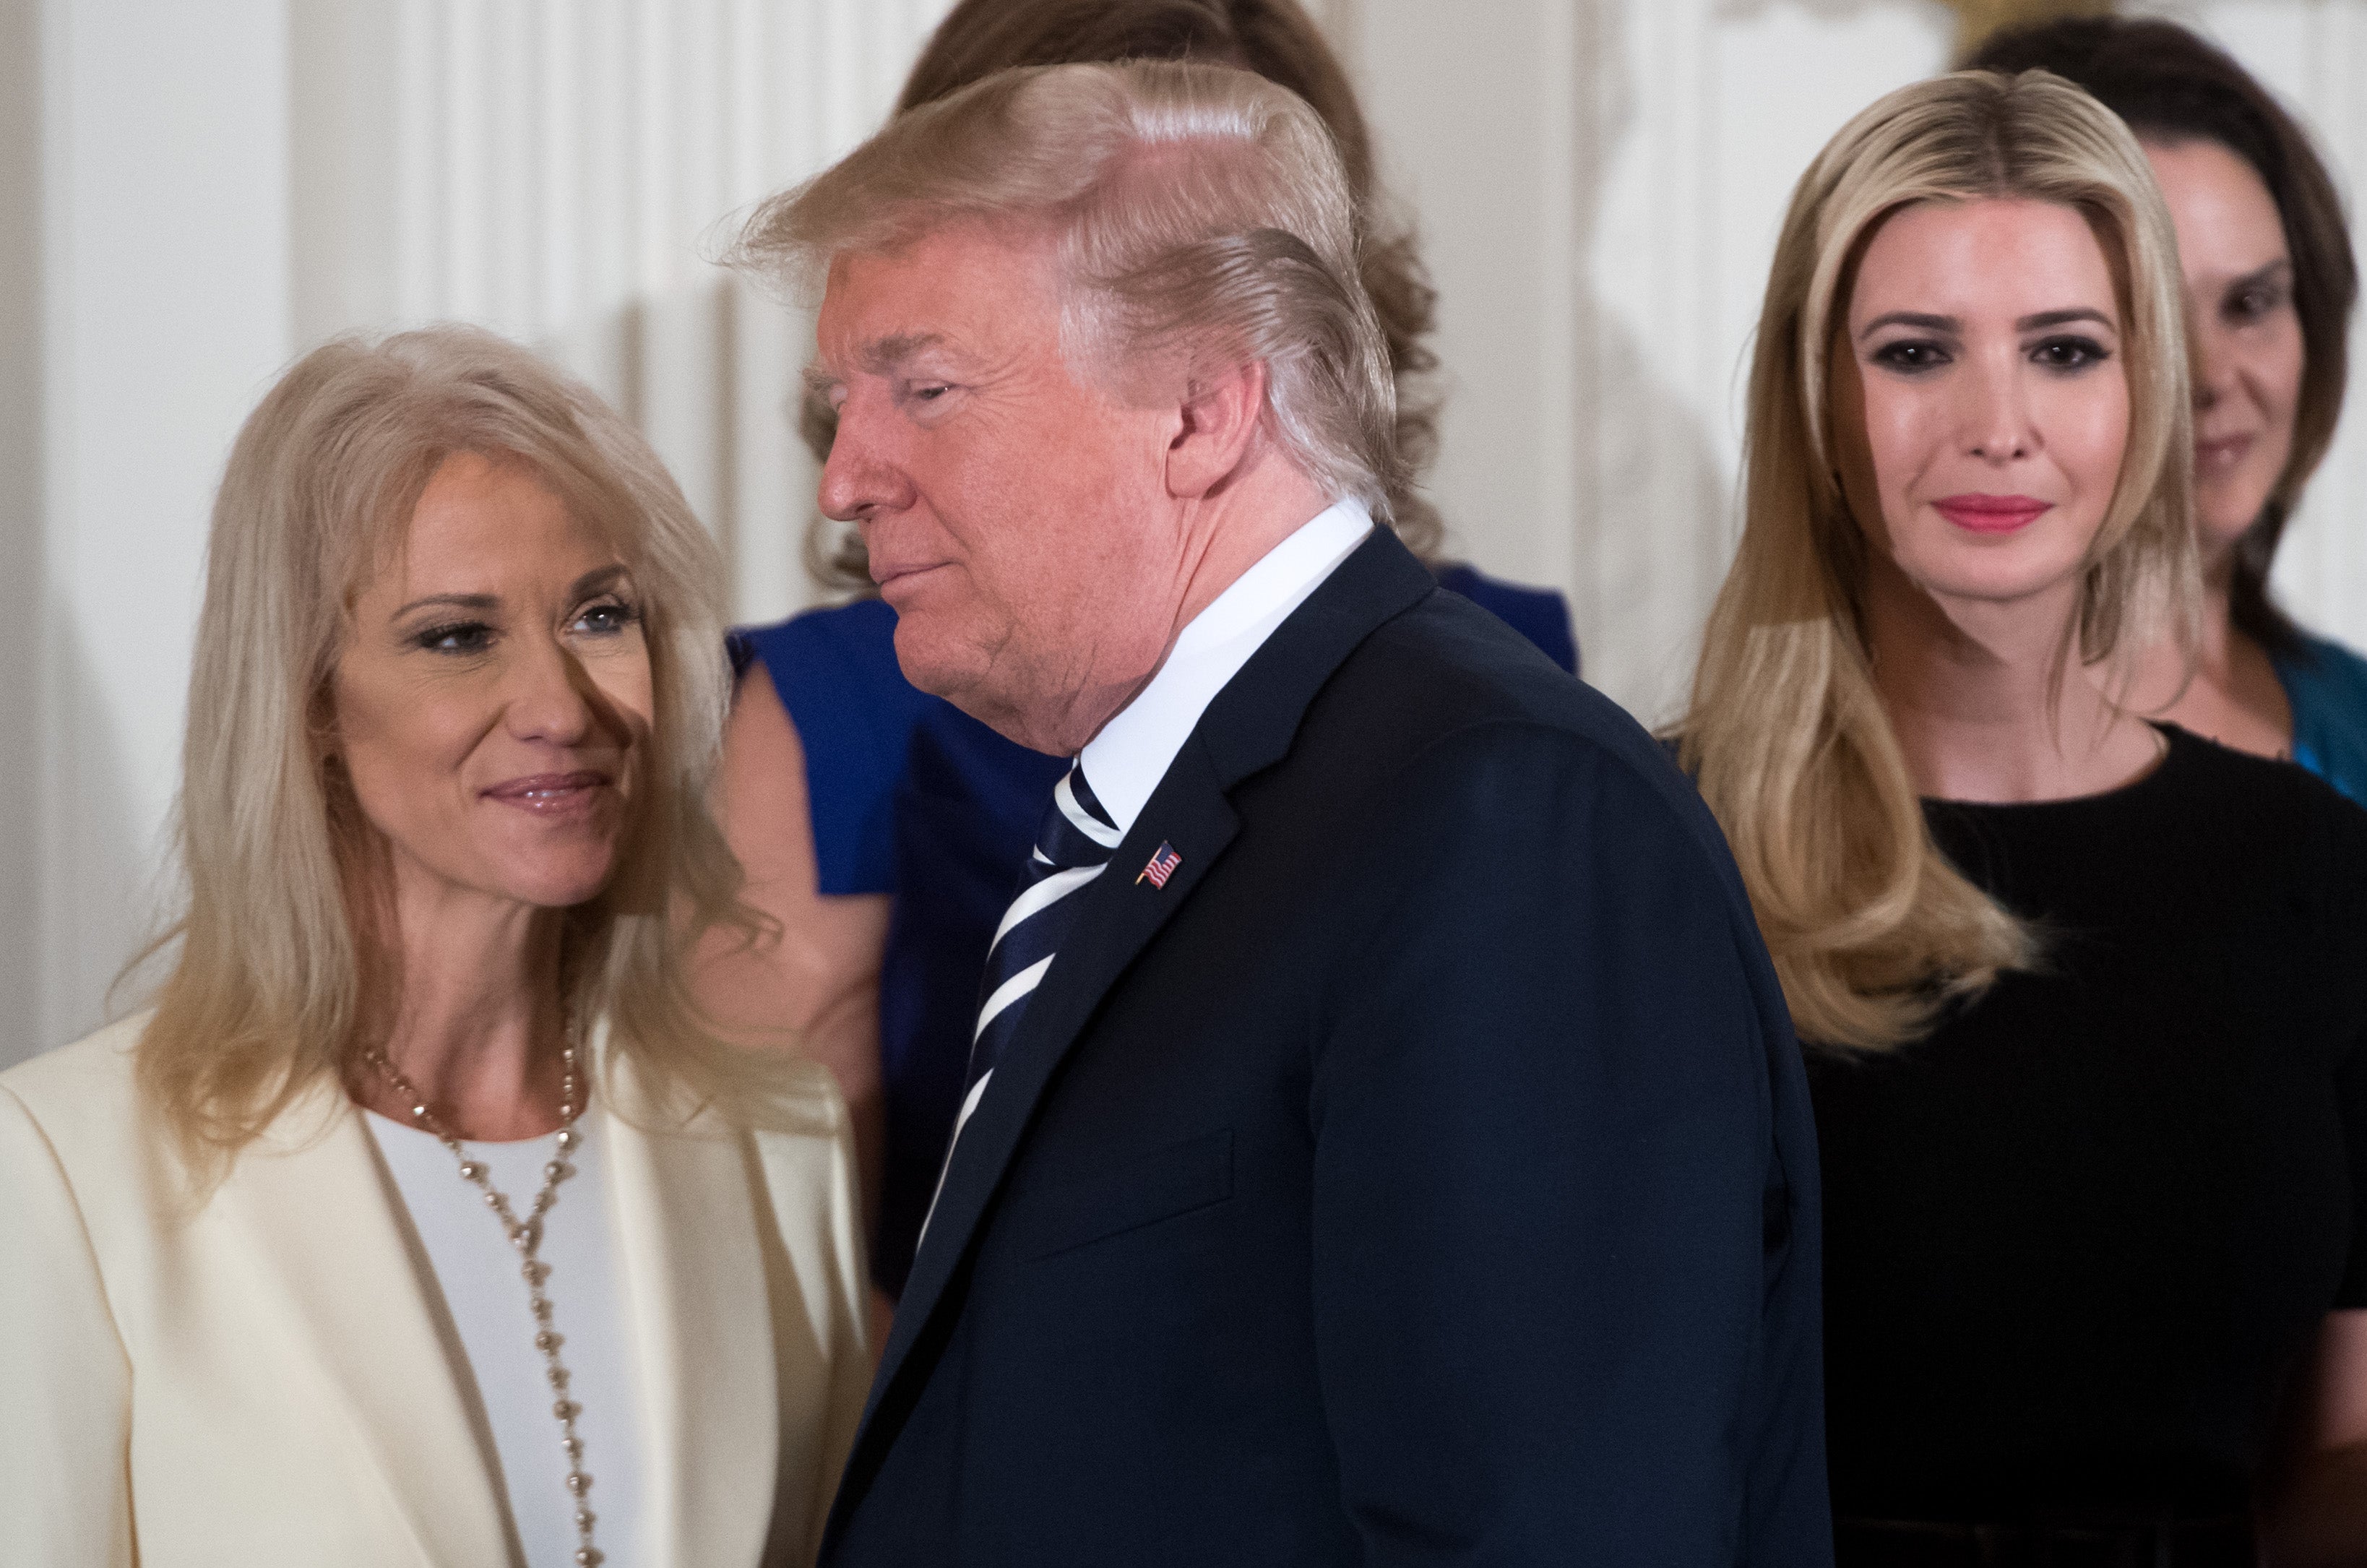 US President Donald Trump walks past his daughter Ivanka Trump (R) and Kellyanne Conway (L), White House Counselor, during an event in honor of Military Mothers and Spousesin May 2018